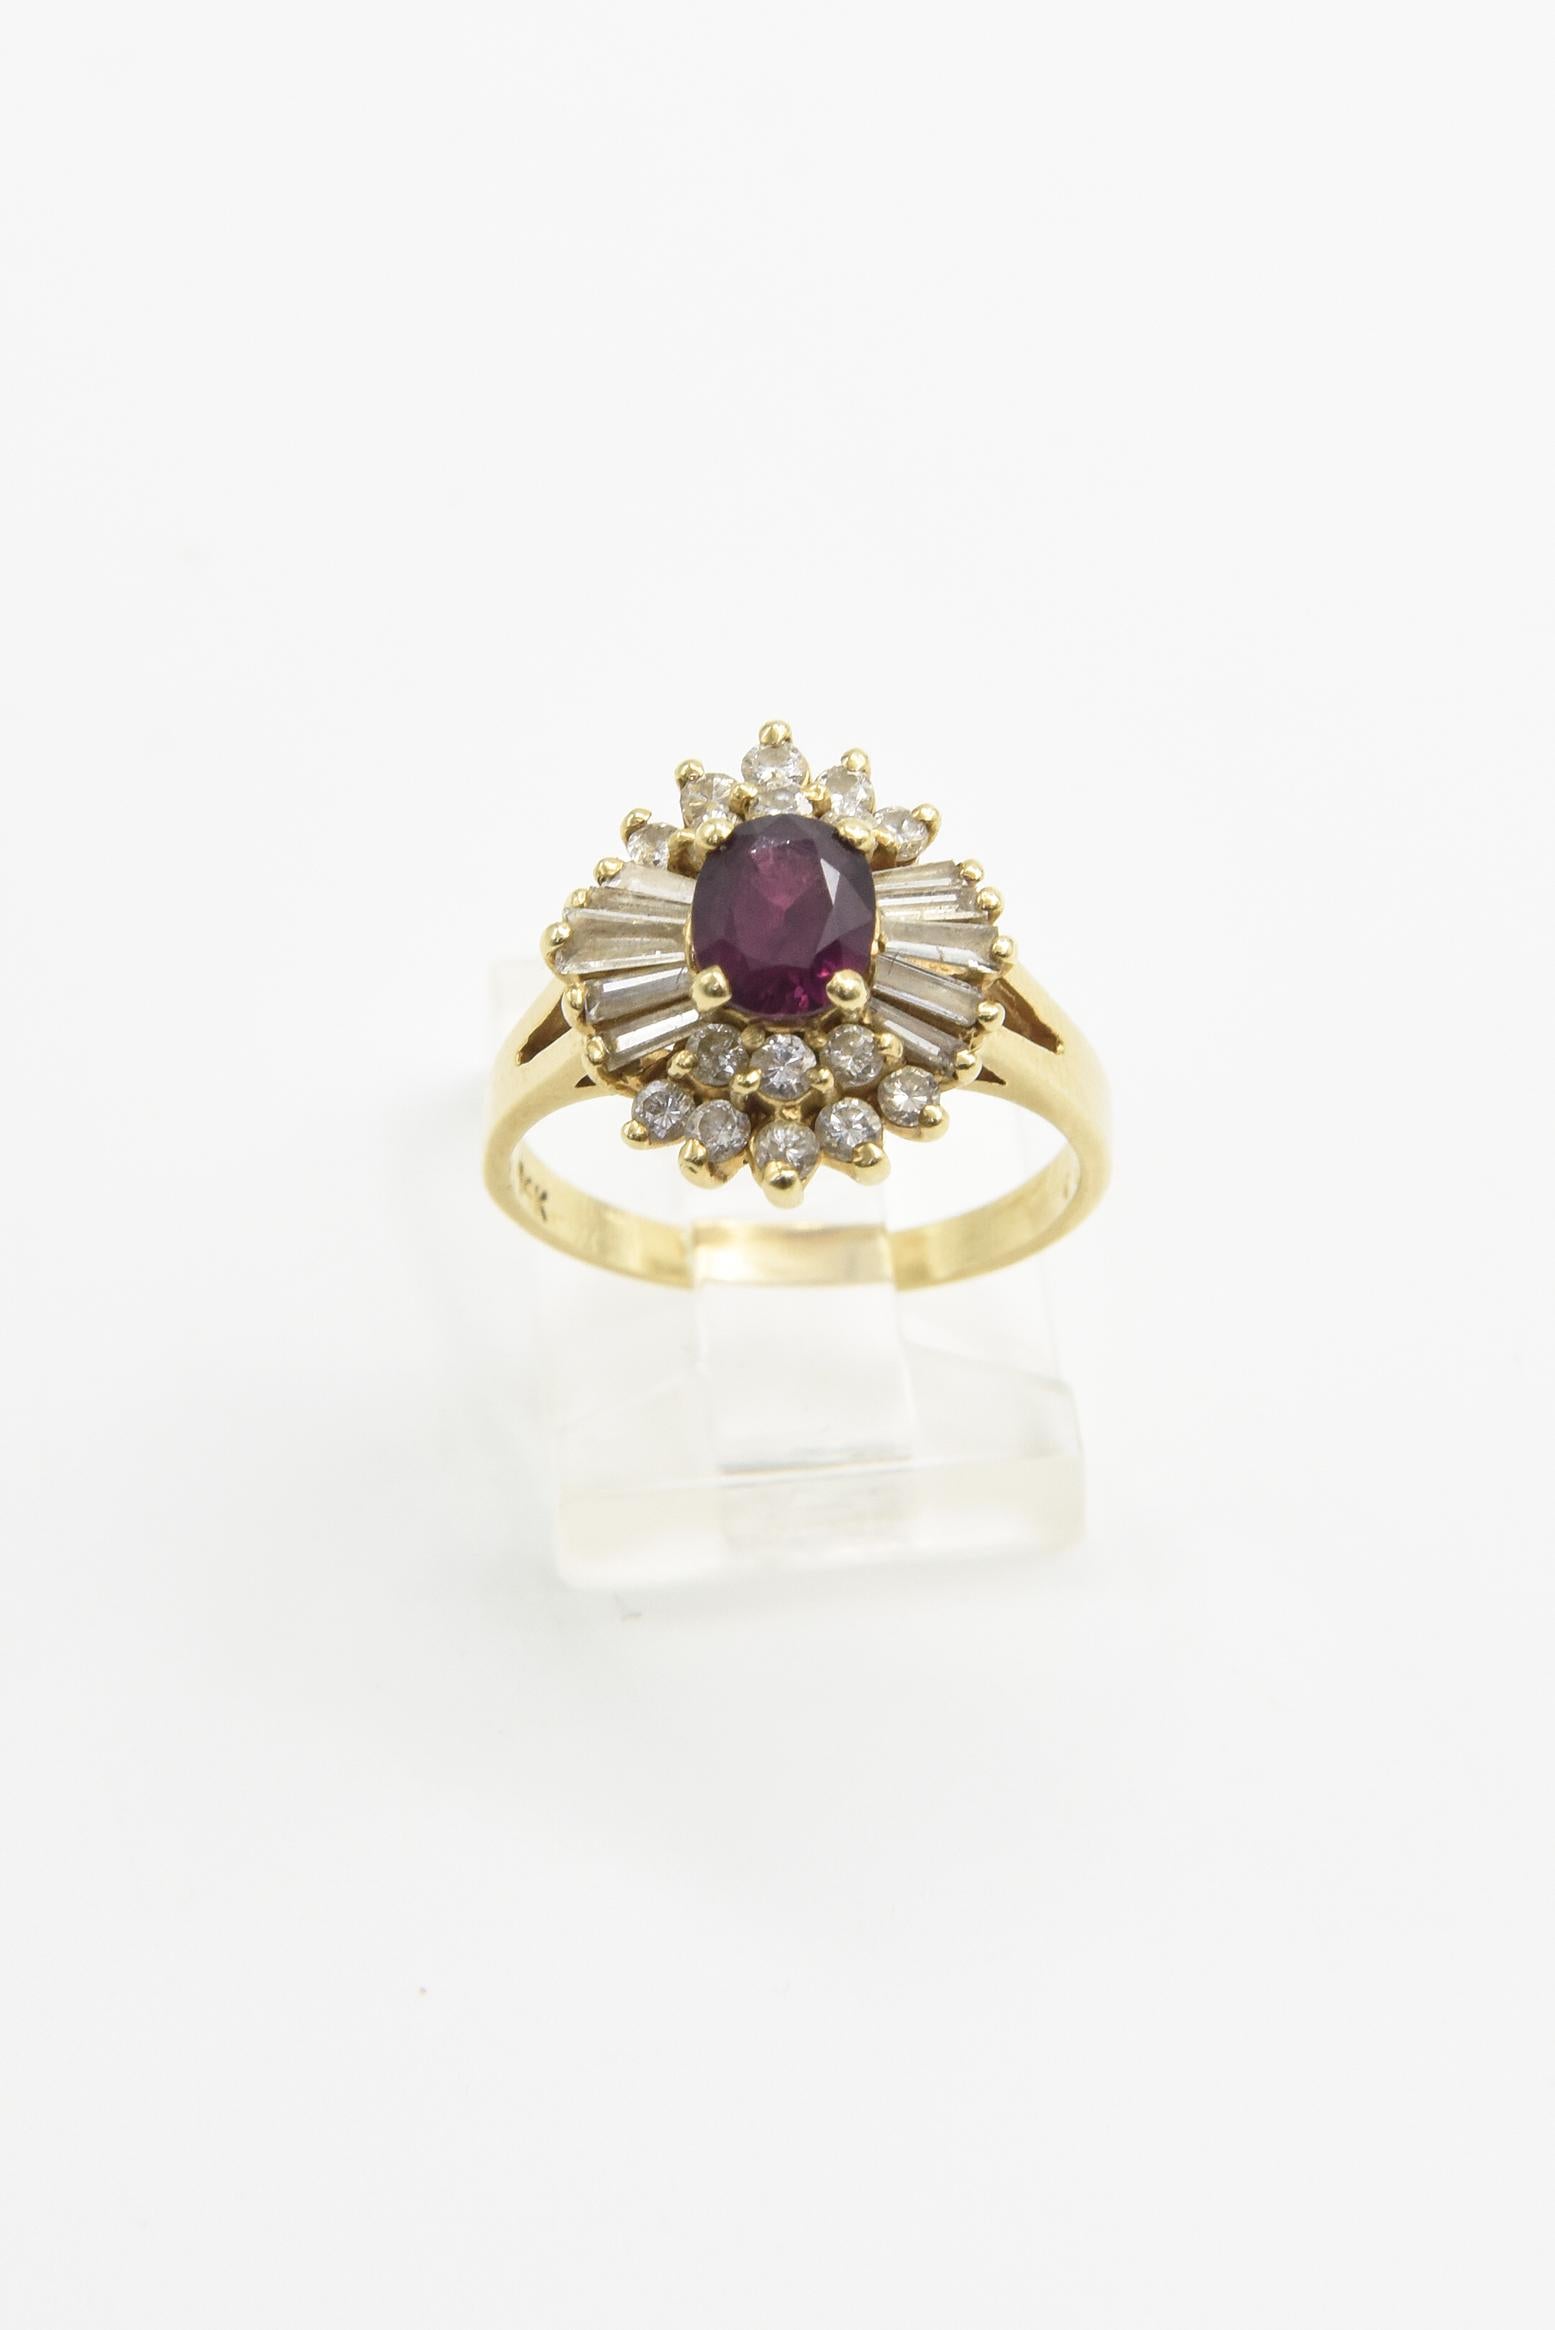 Elegant 14k yellow gold ring containing a centrally set oval ruby in a ballerina diamond mounting with round and baguette diamonds.  There is approximately 1 carat in diamonds.  The ruby measures approximately 6.38mm tall by 5.34mm wide - the